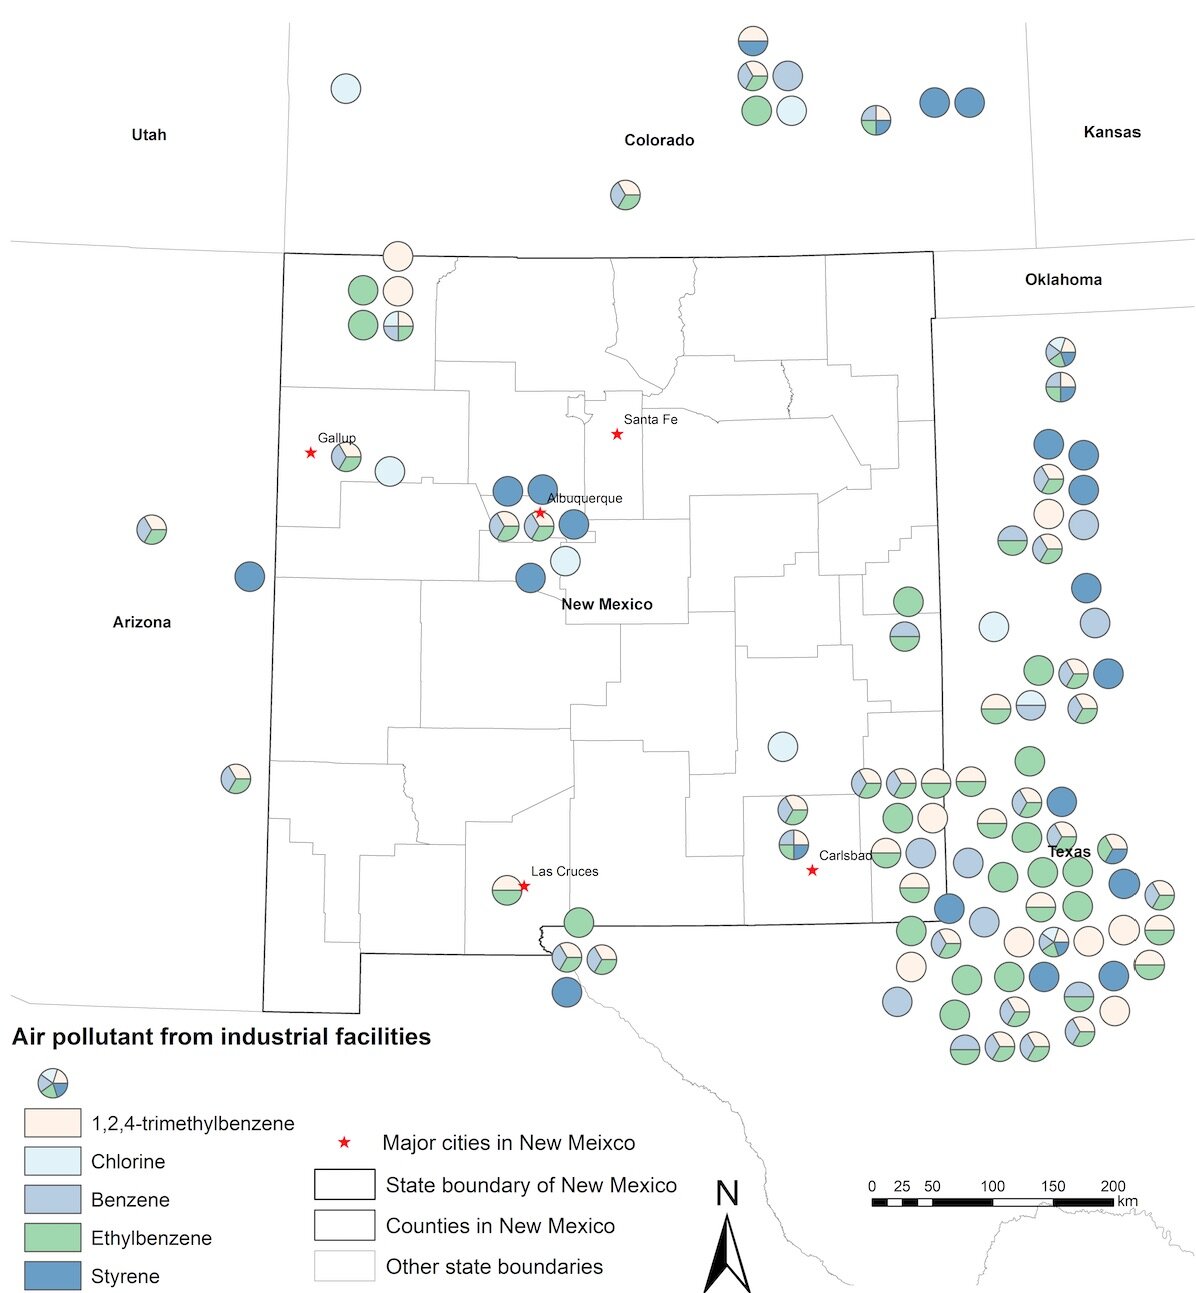 Study finds industrial air pollution contributes to New Mexico’s low birthweight